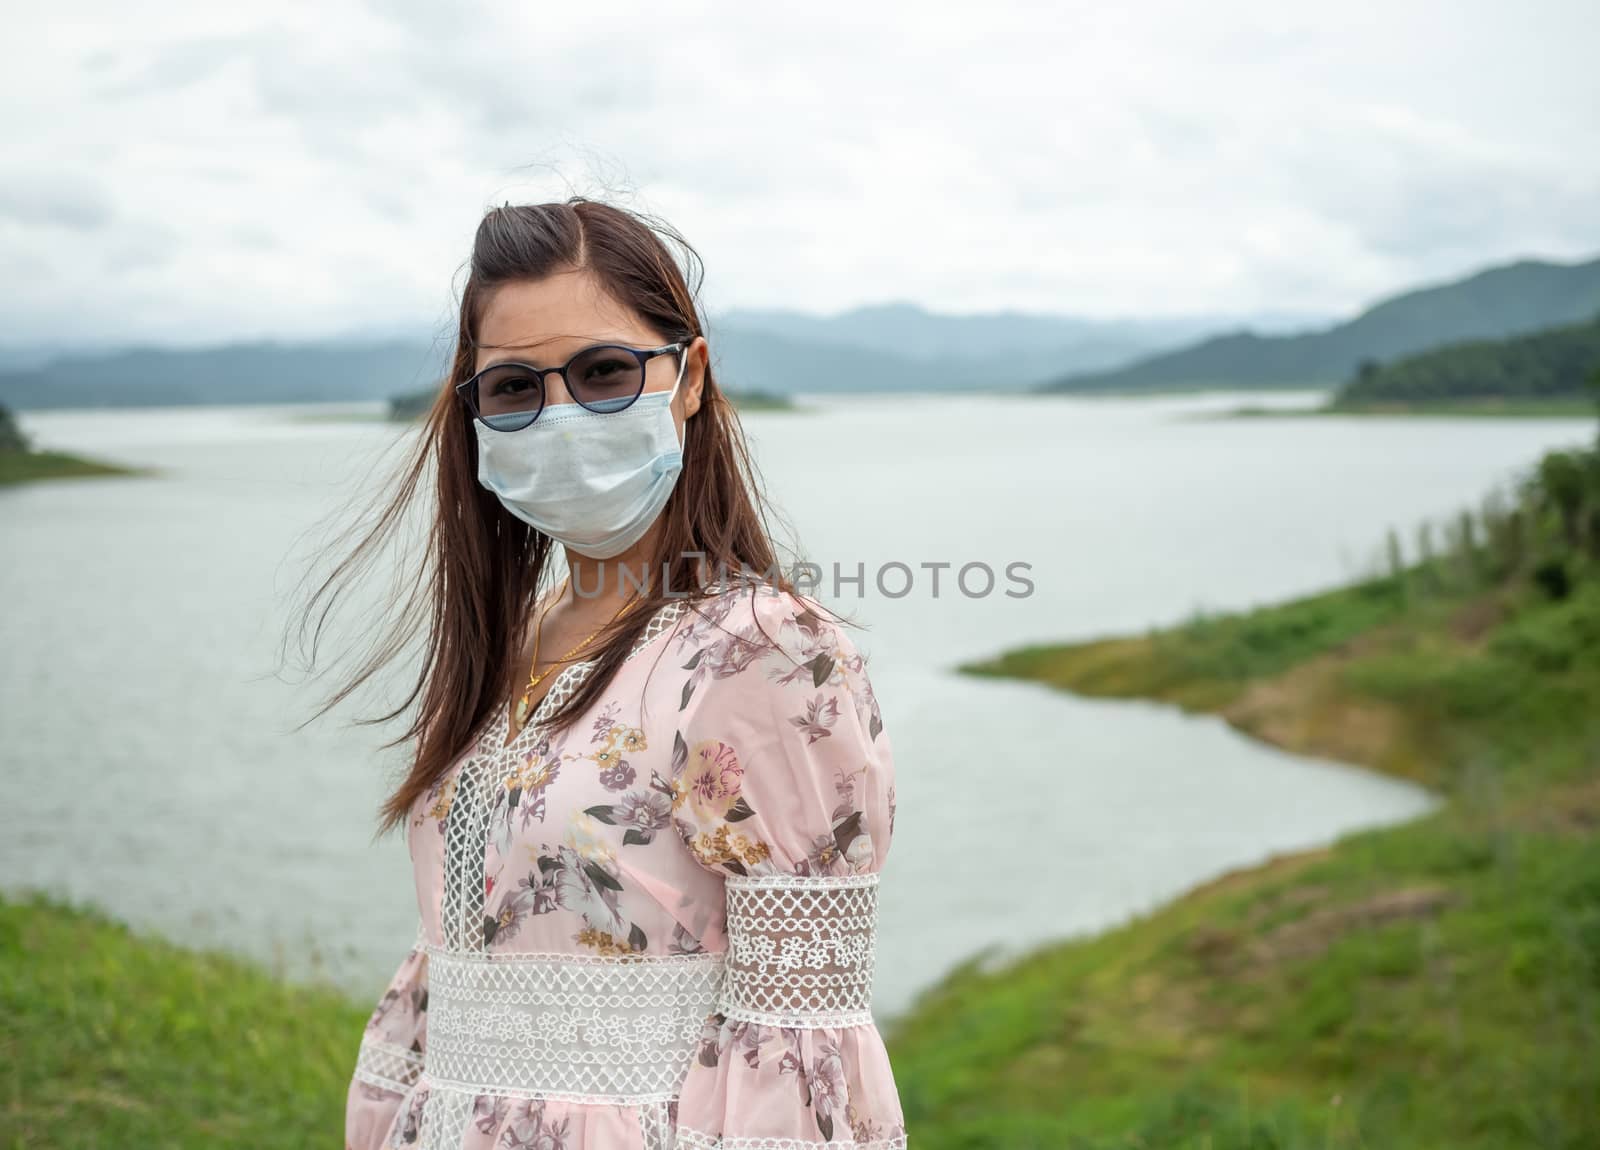 Portrait of a woman wearing a protective mask On the background by Unimages2527